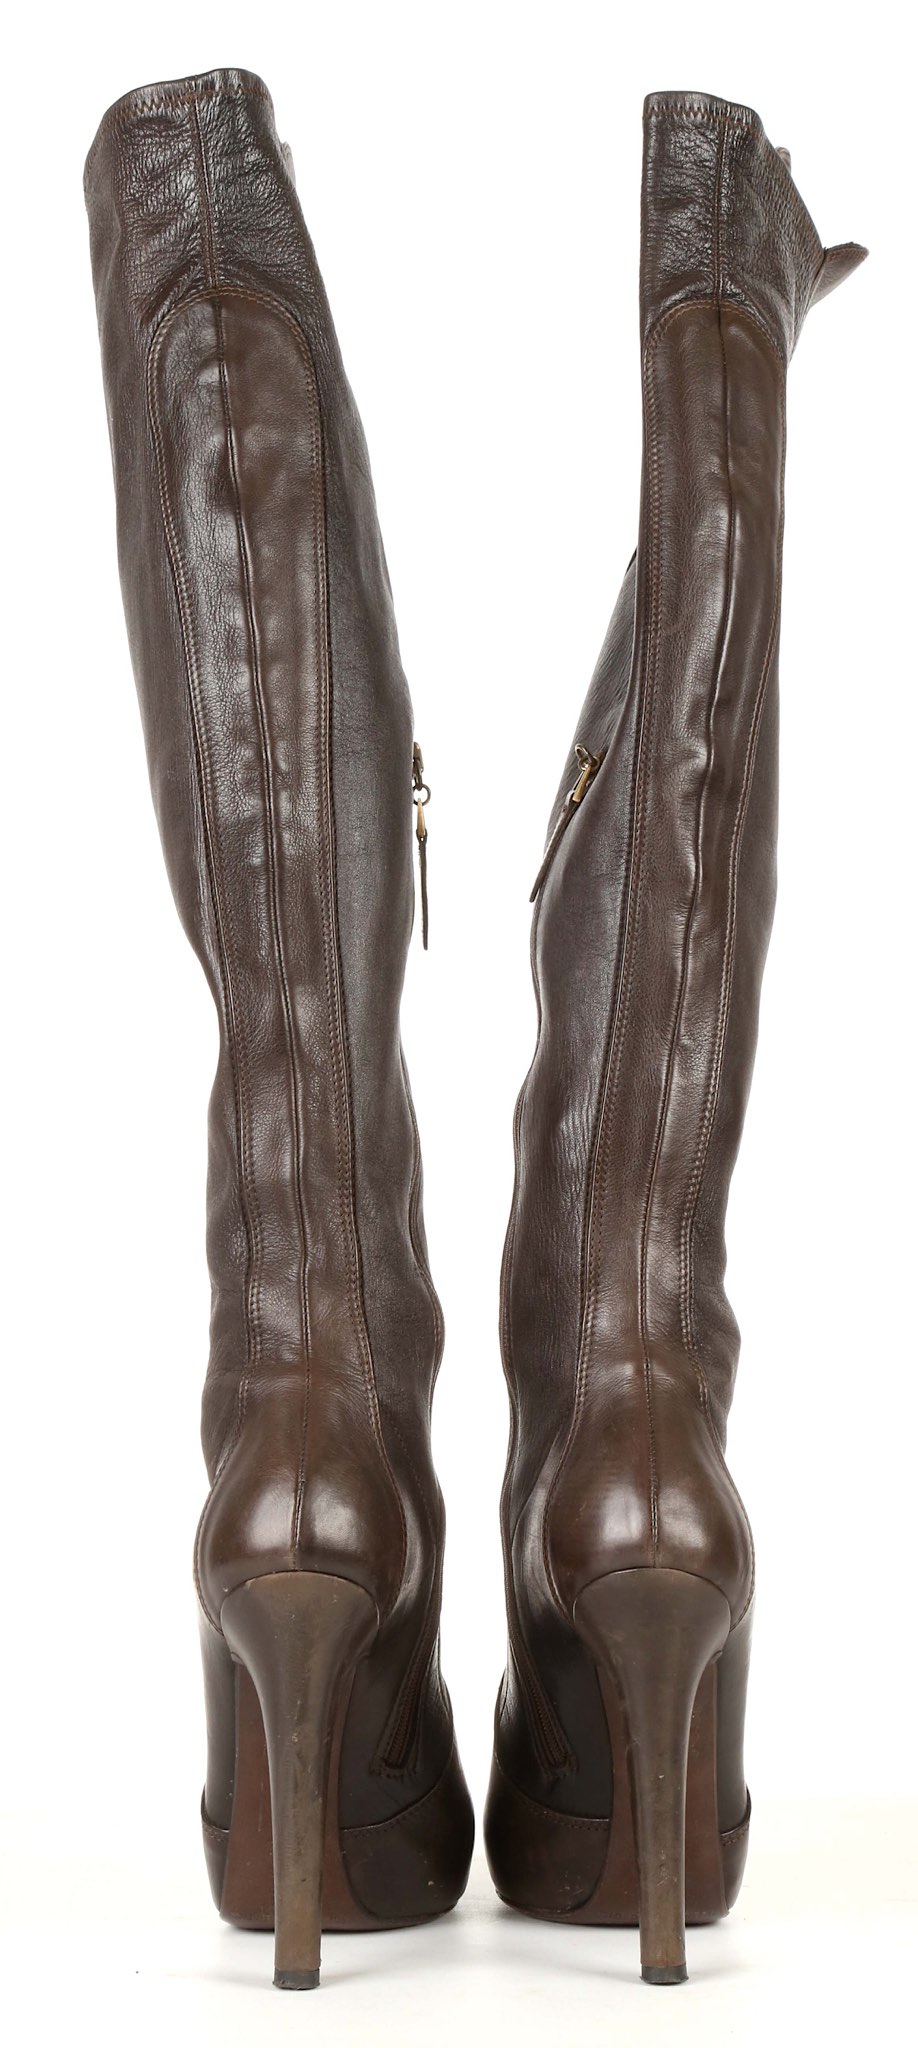 GUCCI THIGH HIGH BLACK LEATHER BOOTS, stiletto heel, size 38, and a pair of brown Casadei boots - Image 8 of 8